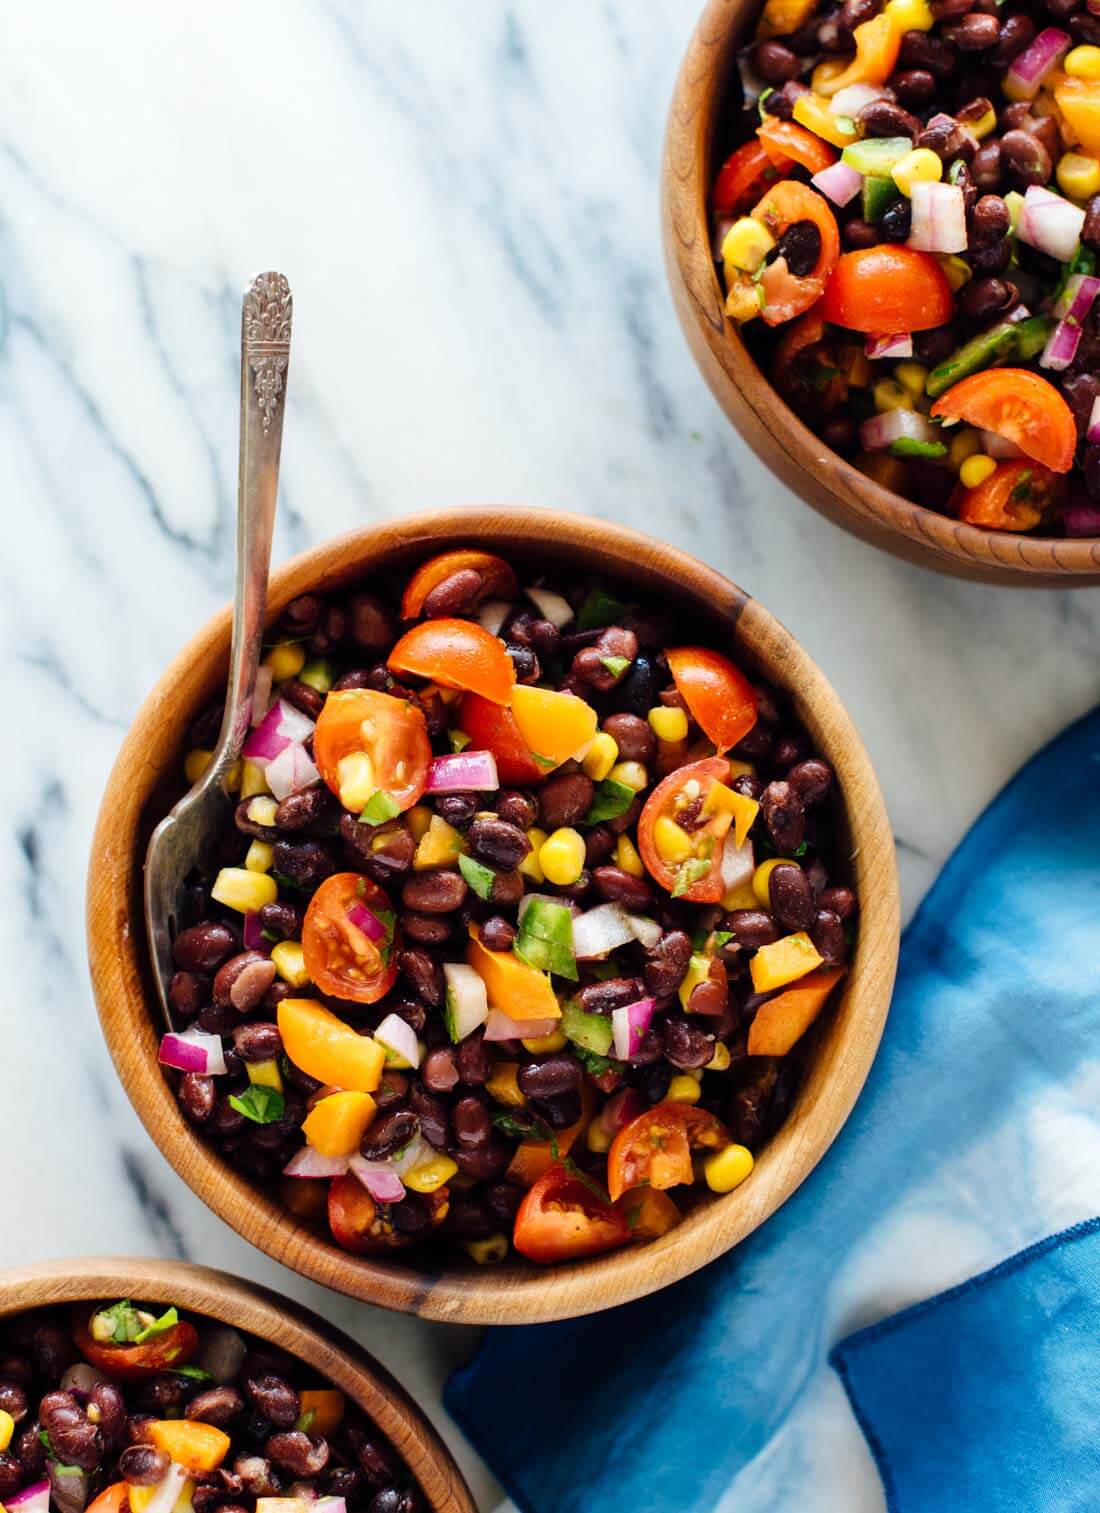 This fresh black bean salad recipe is great for lunch!  It's also perfect for parties and potlucks.  Get the recipe at cookieandkate.com